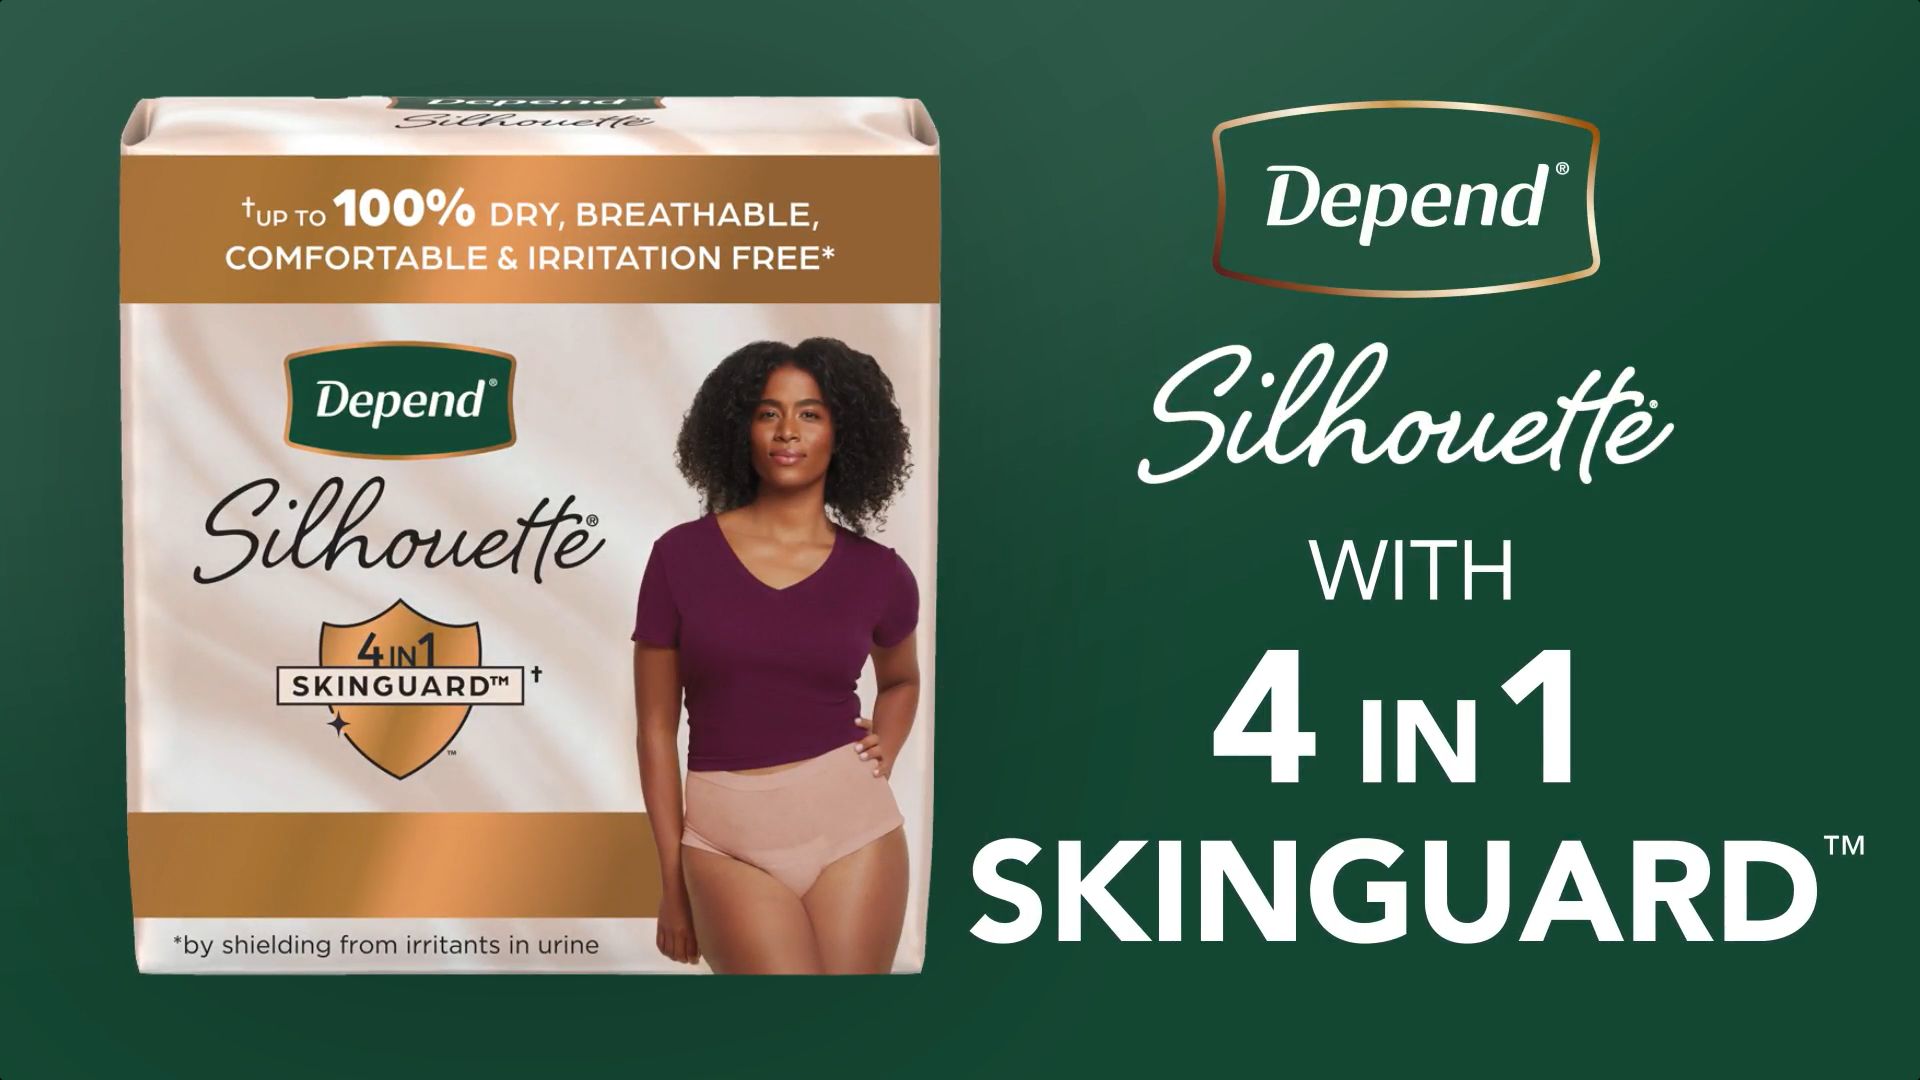 Depend Silhouette Disposable Underwear Female Waistband Style Small, 51413,  Maximum, 16 Ct, Small, 16 ct - Harris Teeter